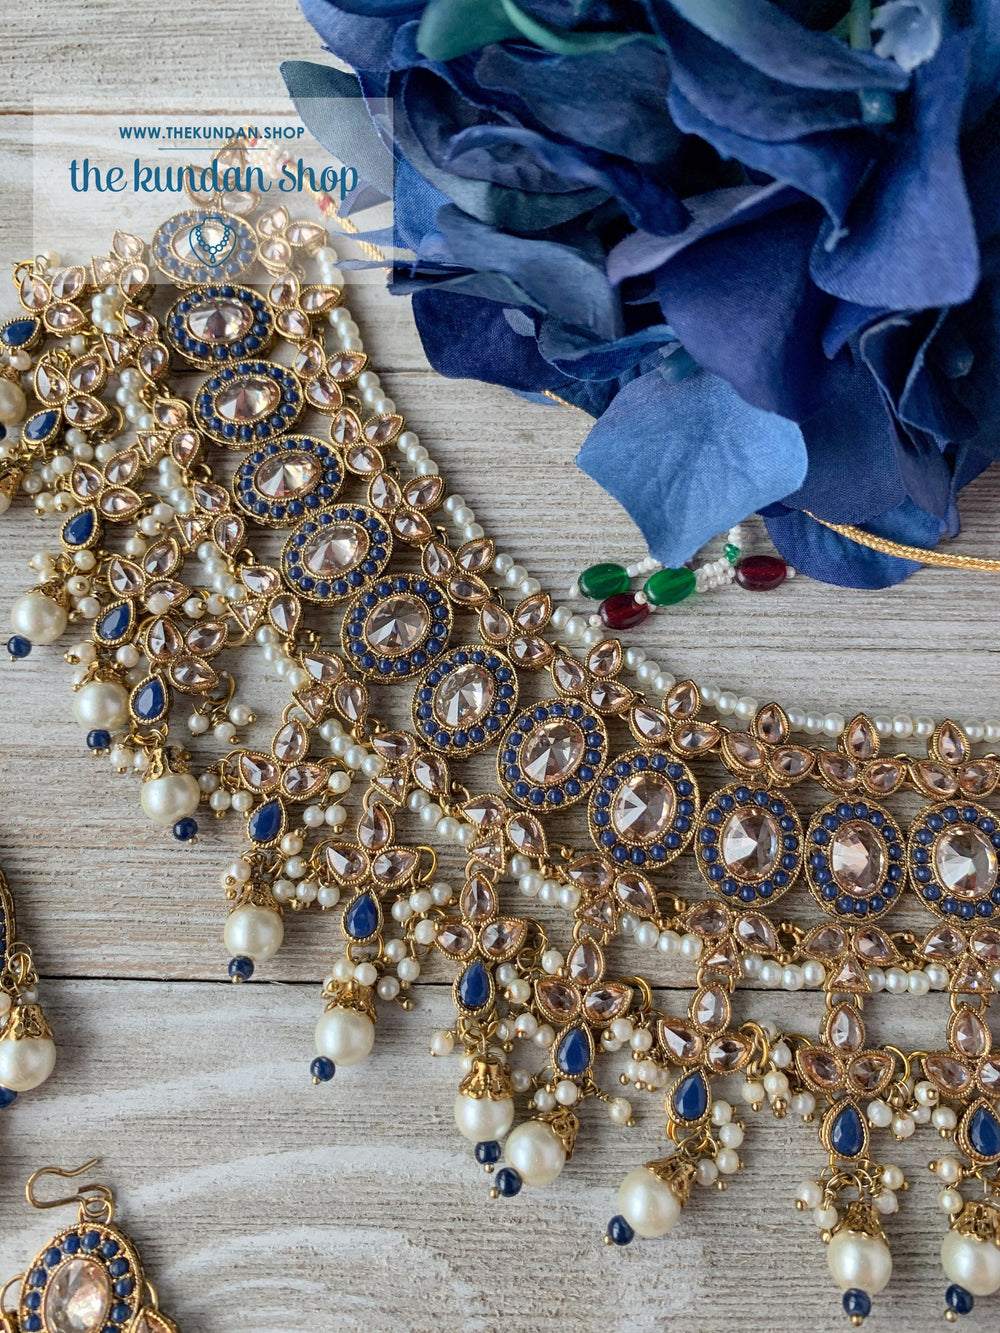 Dignify Set in Midnight Blue Necklace Sets THE KUNDAN SHOP 